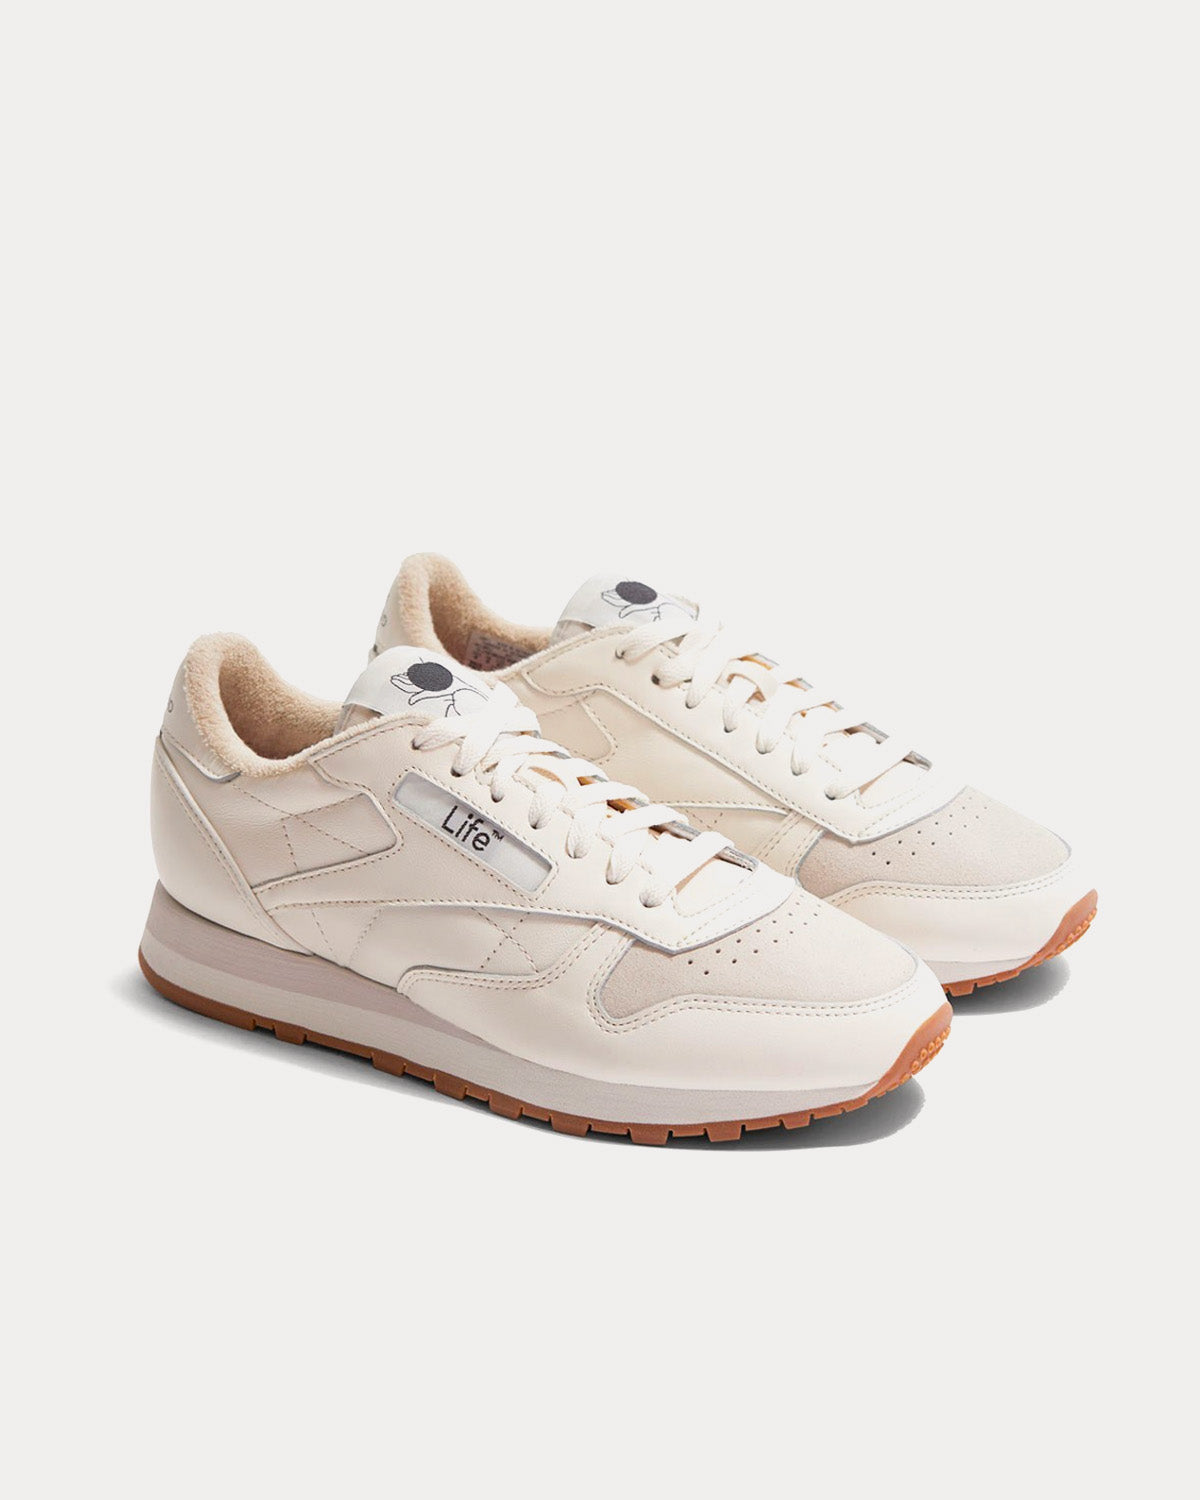 Reebok x Wood Wood - Classic Leather Chalk / Pure Grey 1 / Stucco Low Top Sneakers